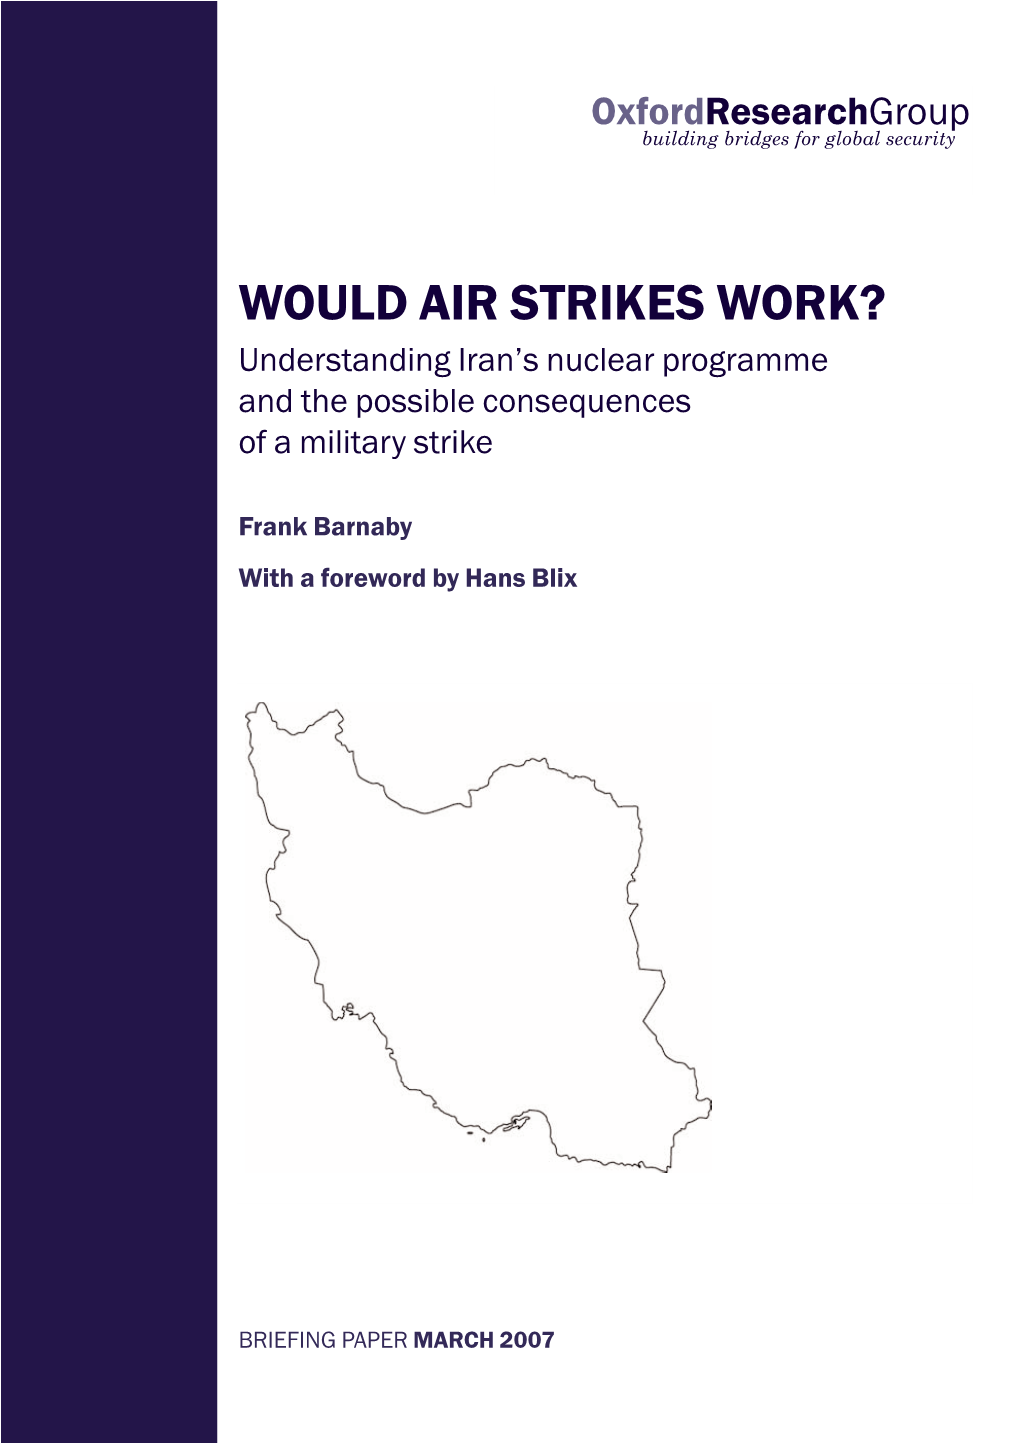 WOULD AIR STRIKES WORK? Understanding Iran’S Nuclear Programme and the Possible Consequences of a Military Strike